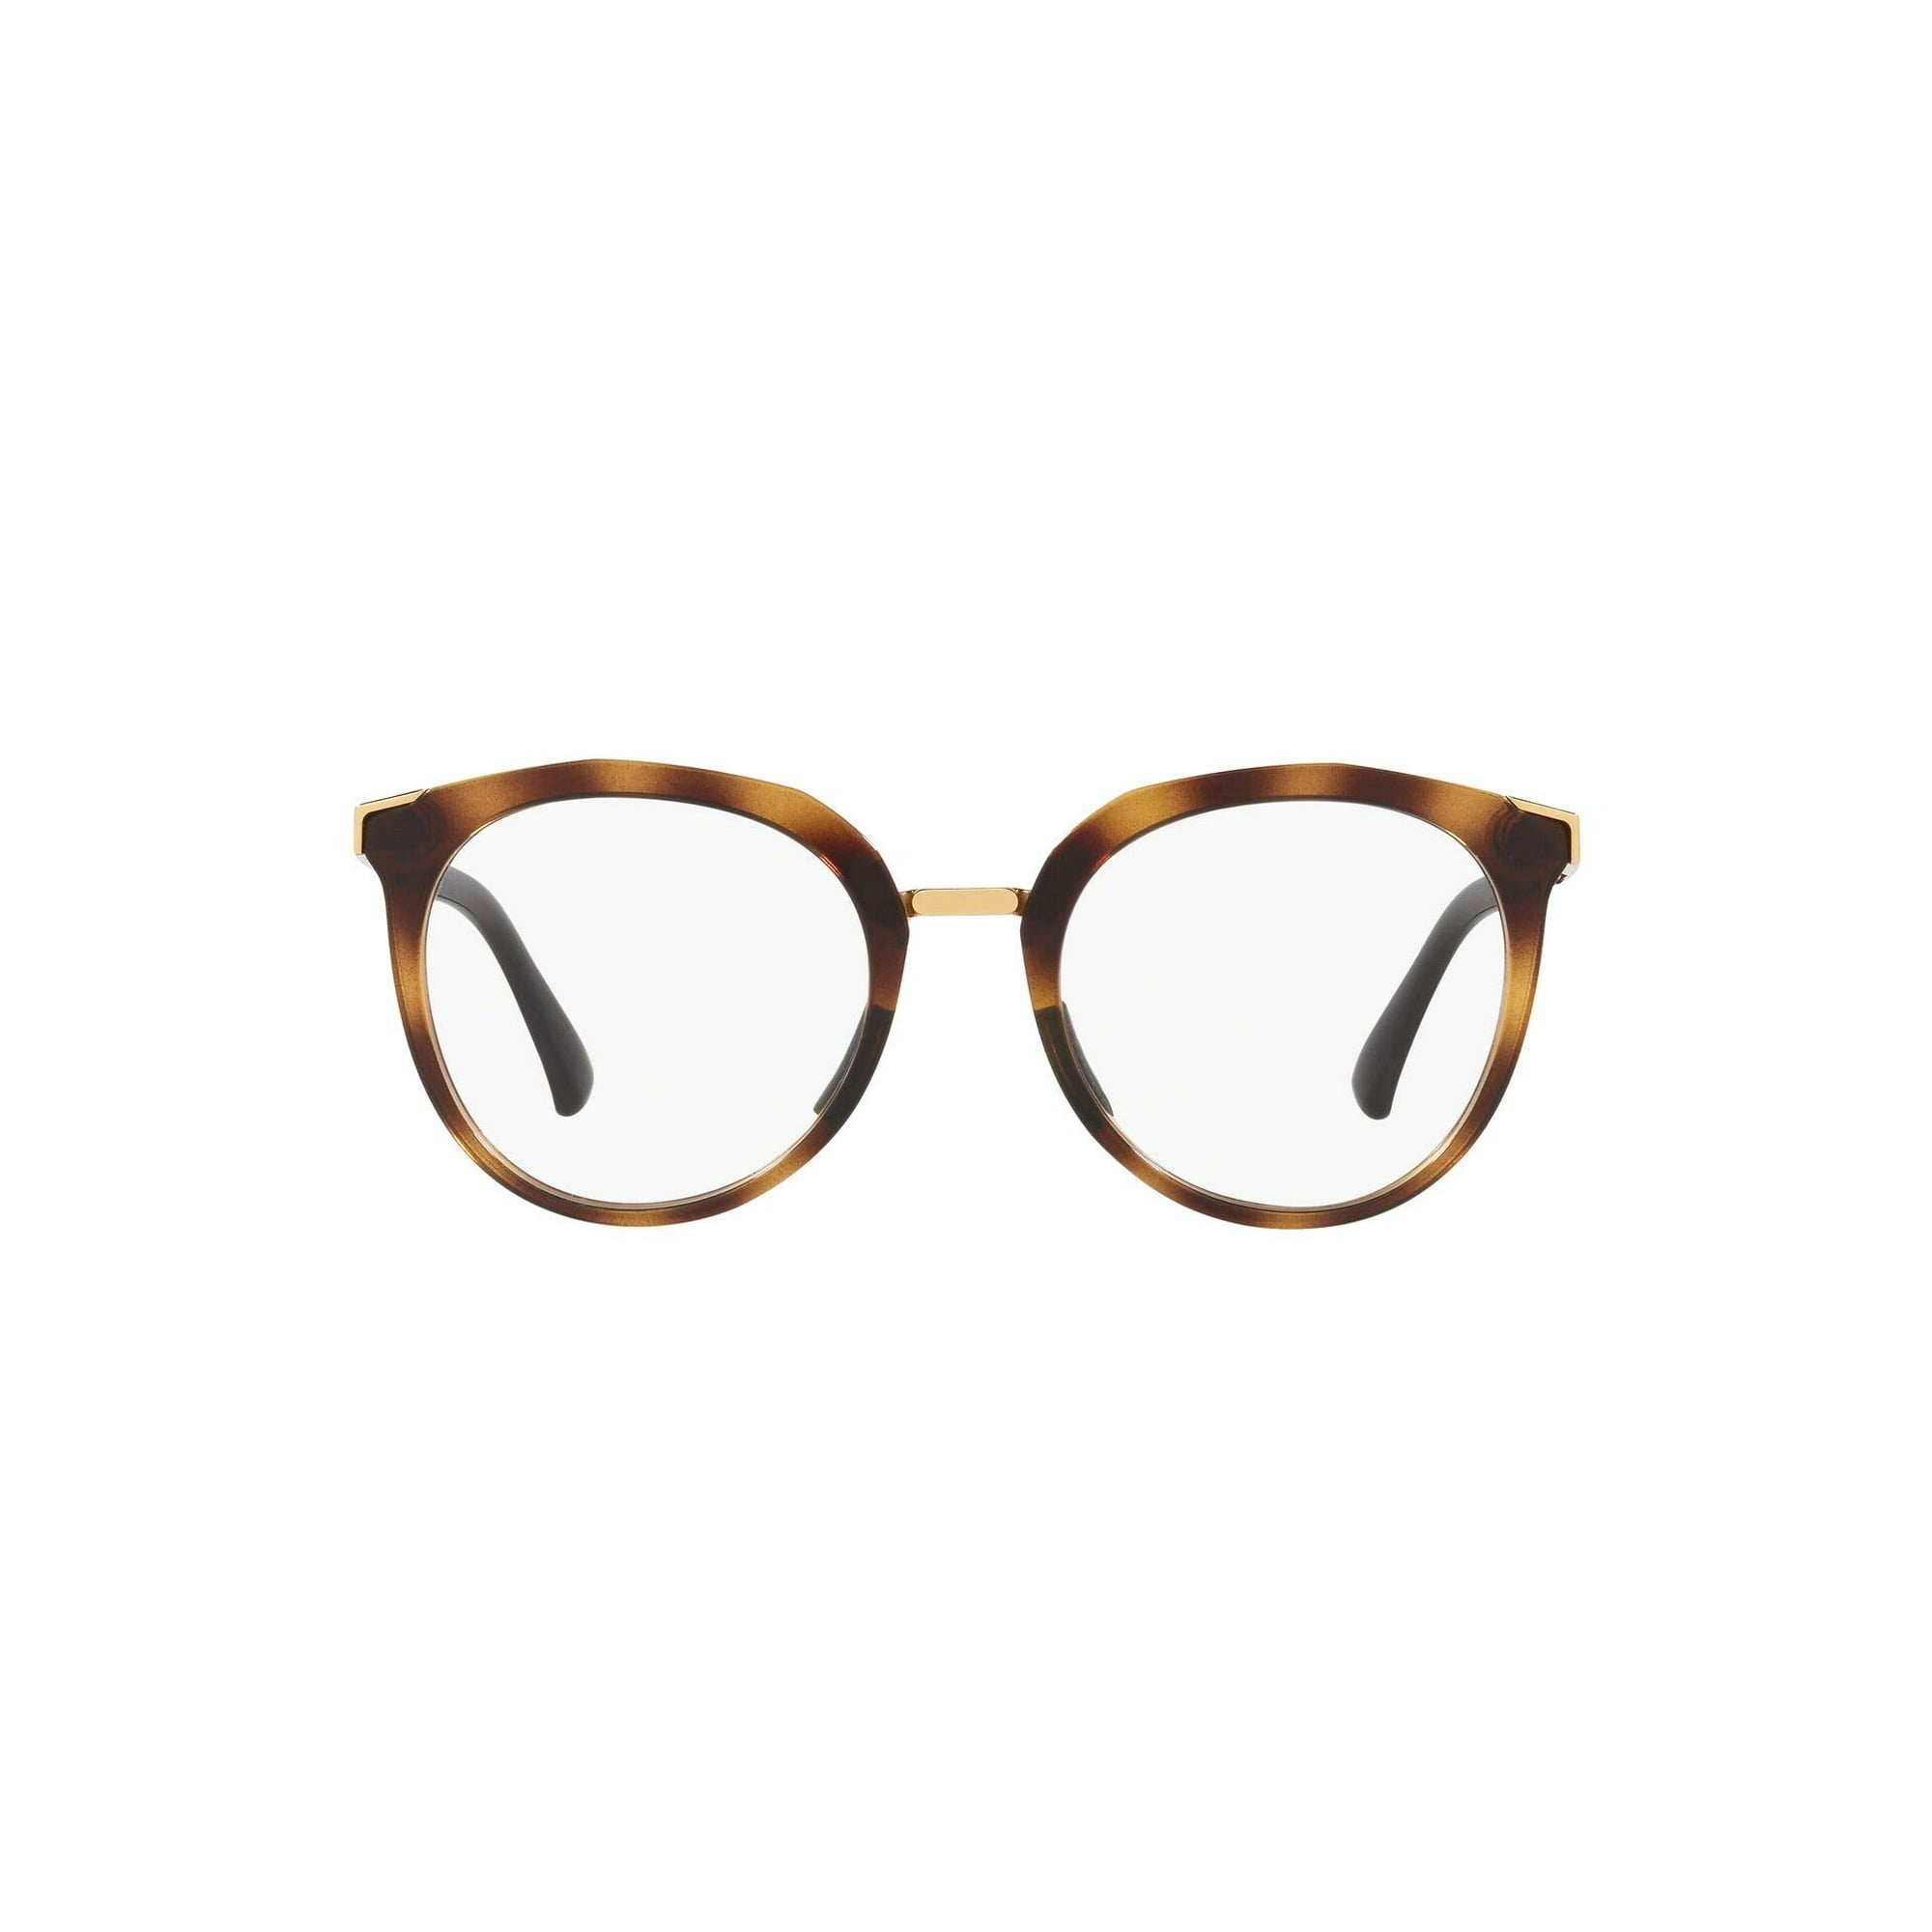 Oakley - Top Knot (52) RX Frame Only - Polished Brown Tortoise | Walmart  Canada